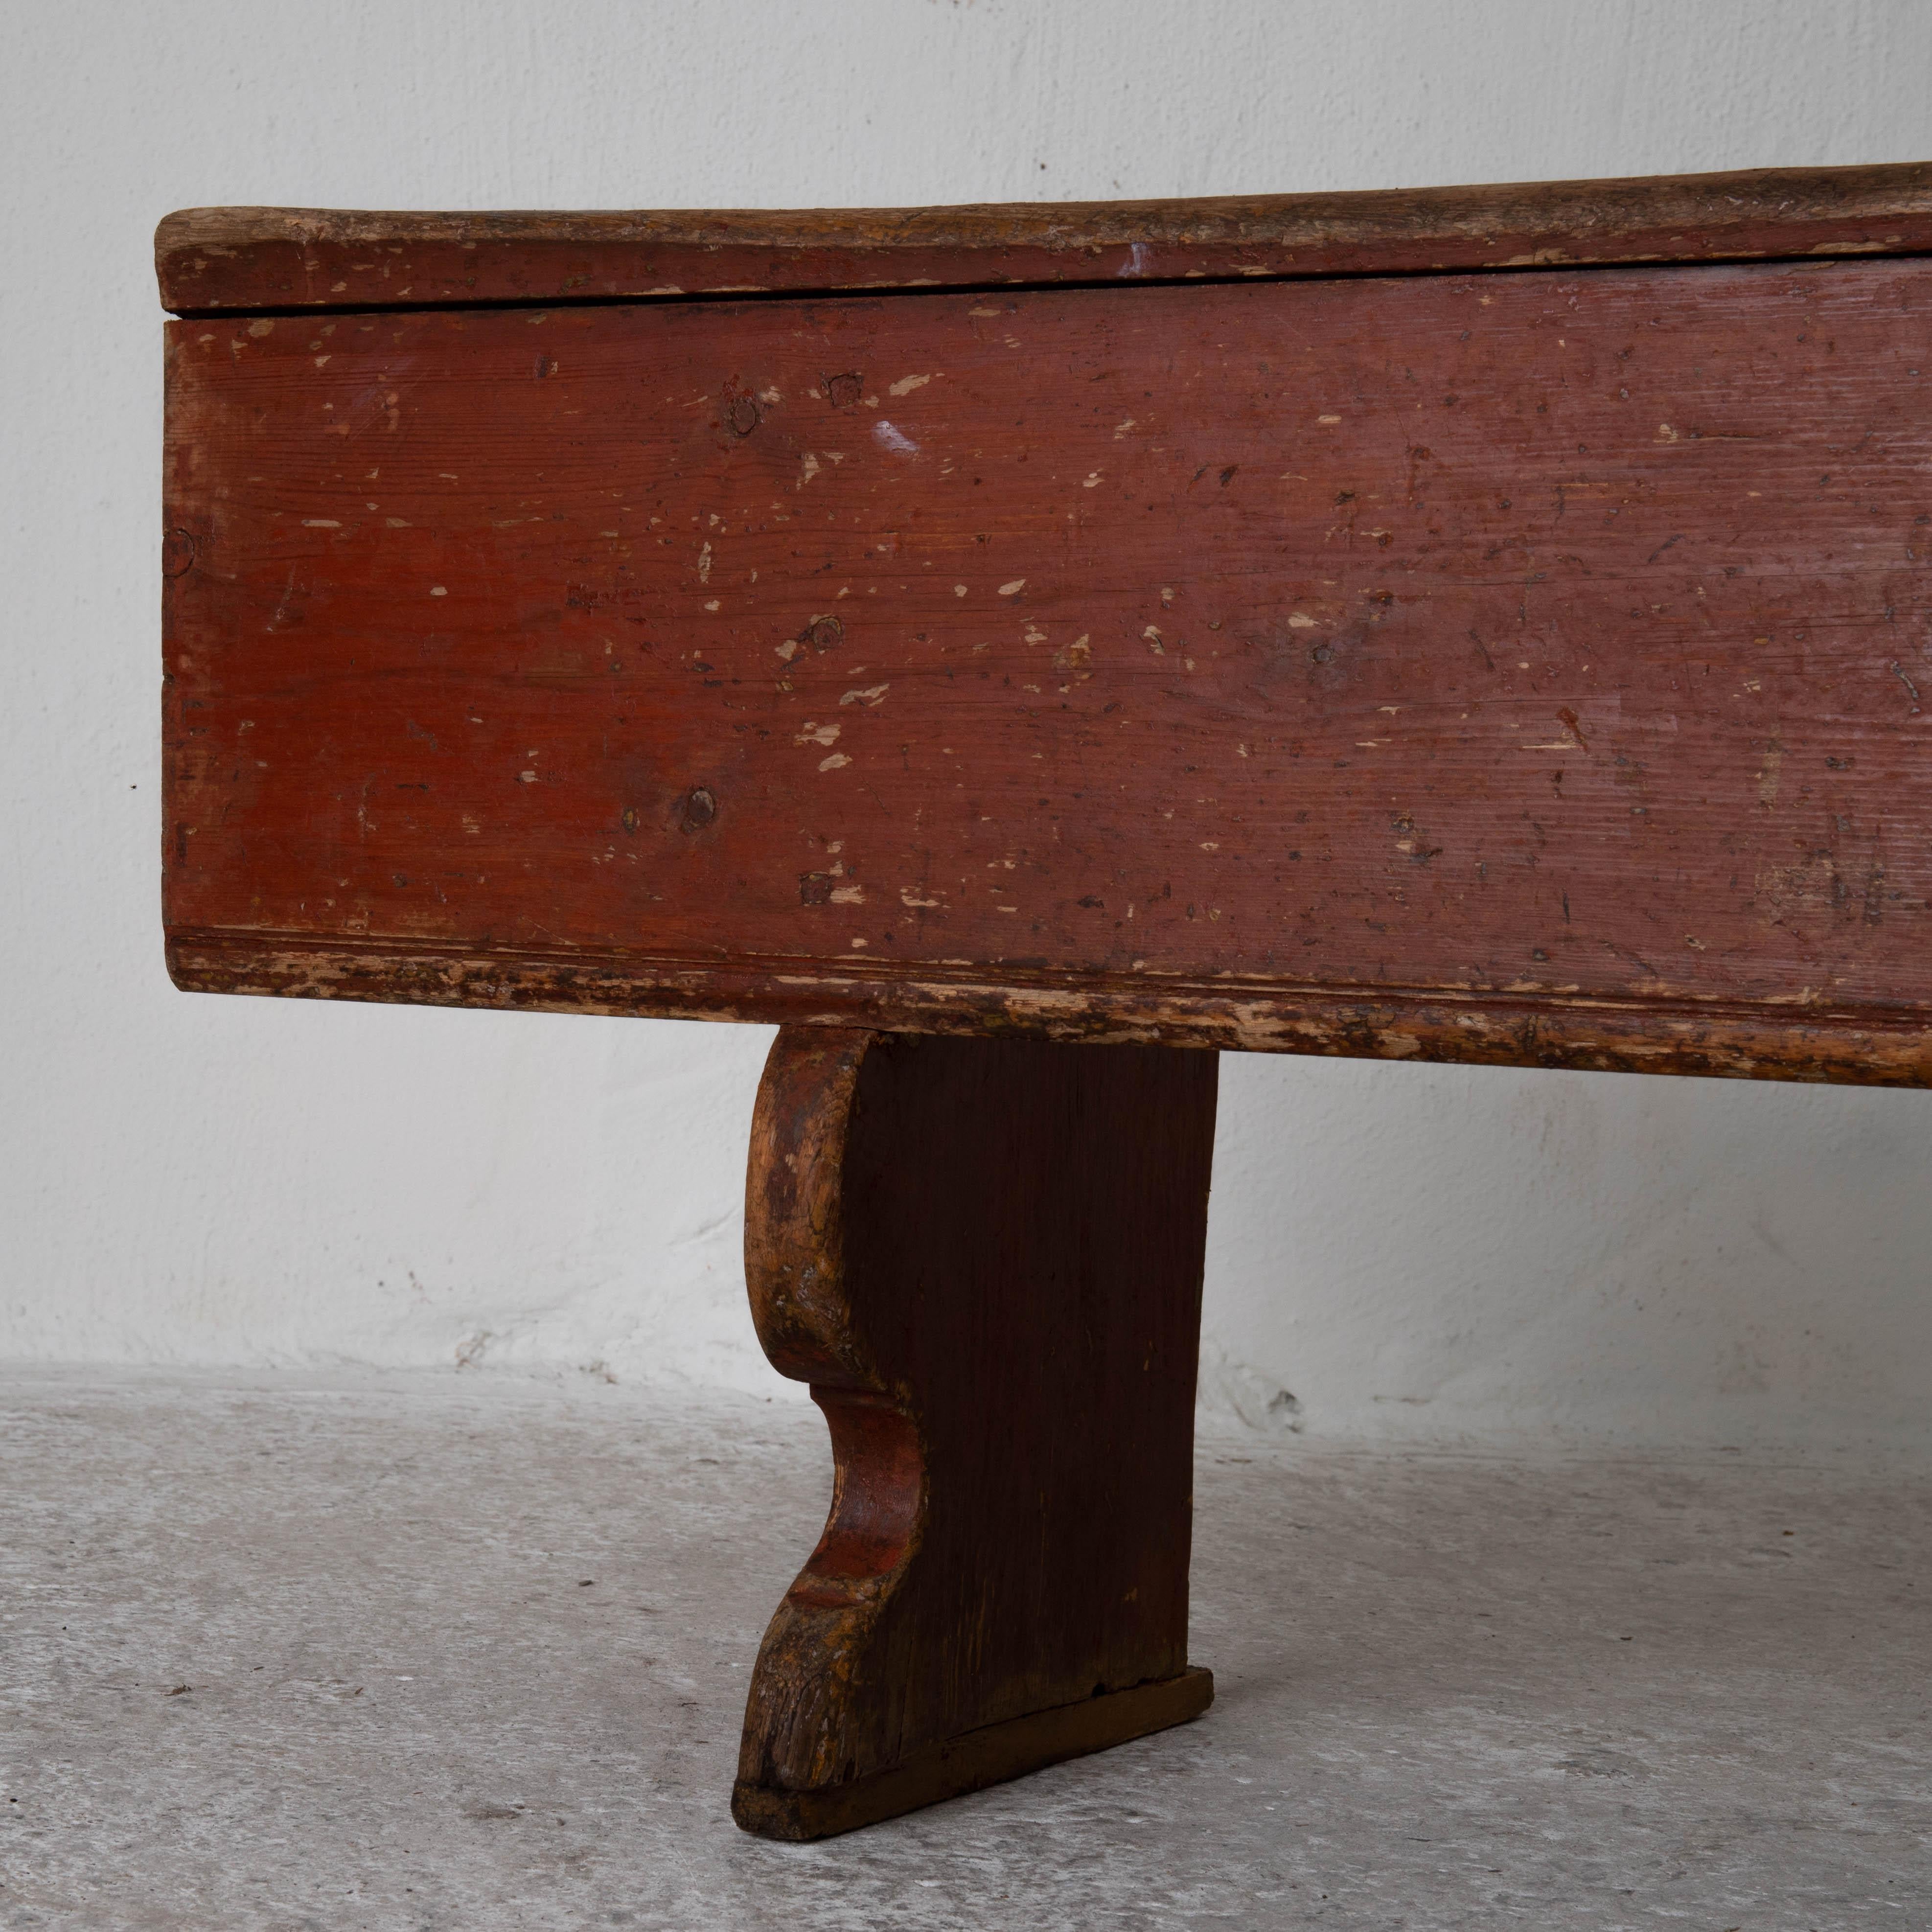 Bench Swedish red wood, 19th century, Sweden. A bench made during the early 19th century in Sweden. Original paint in a dark red shade.

   